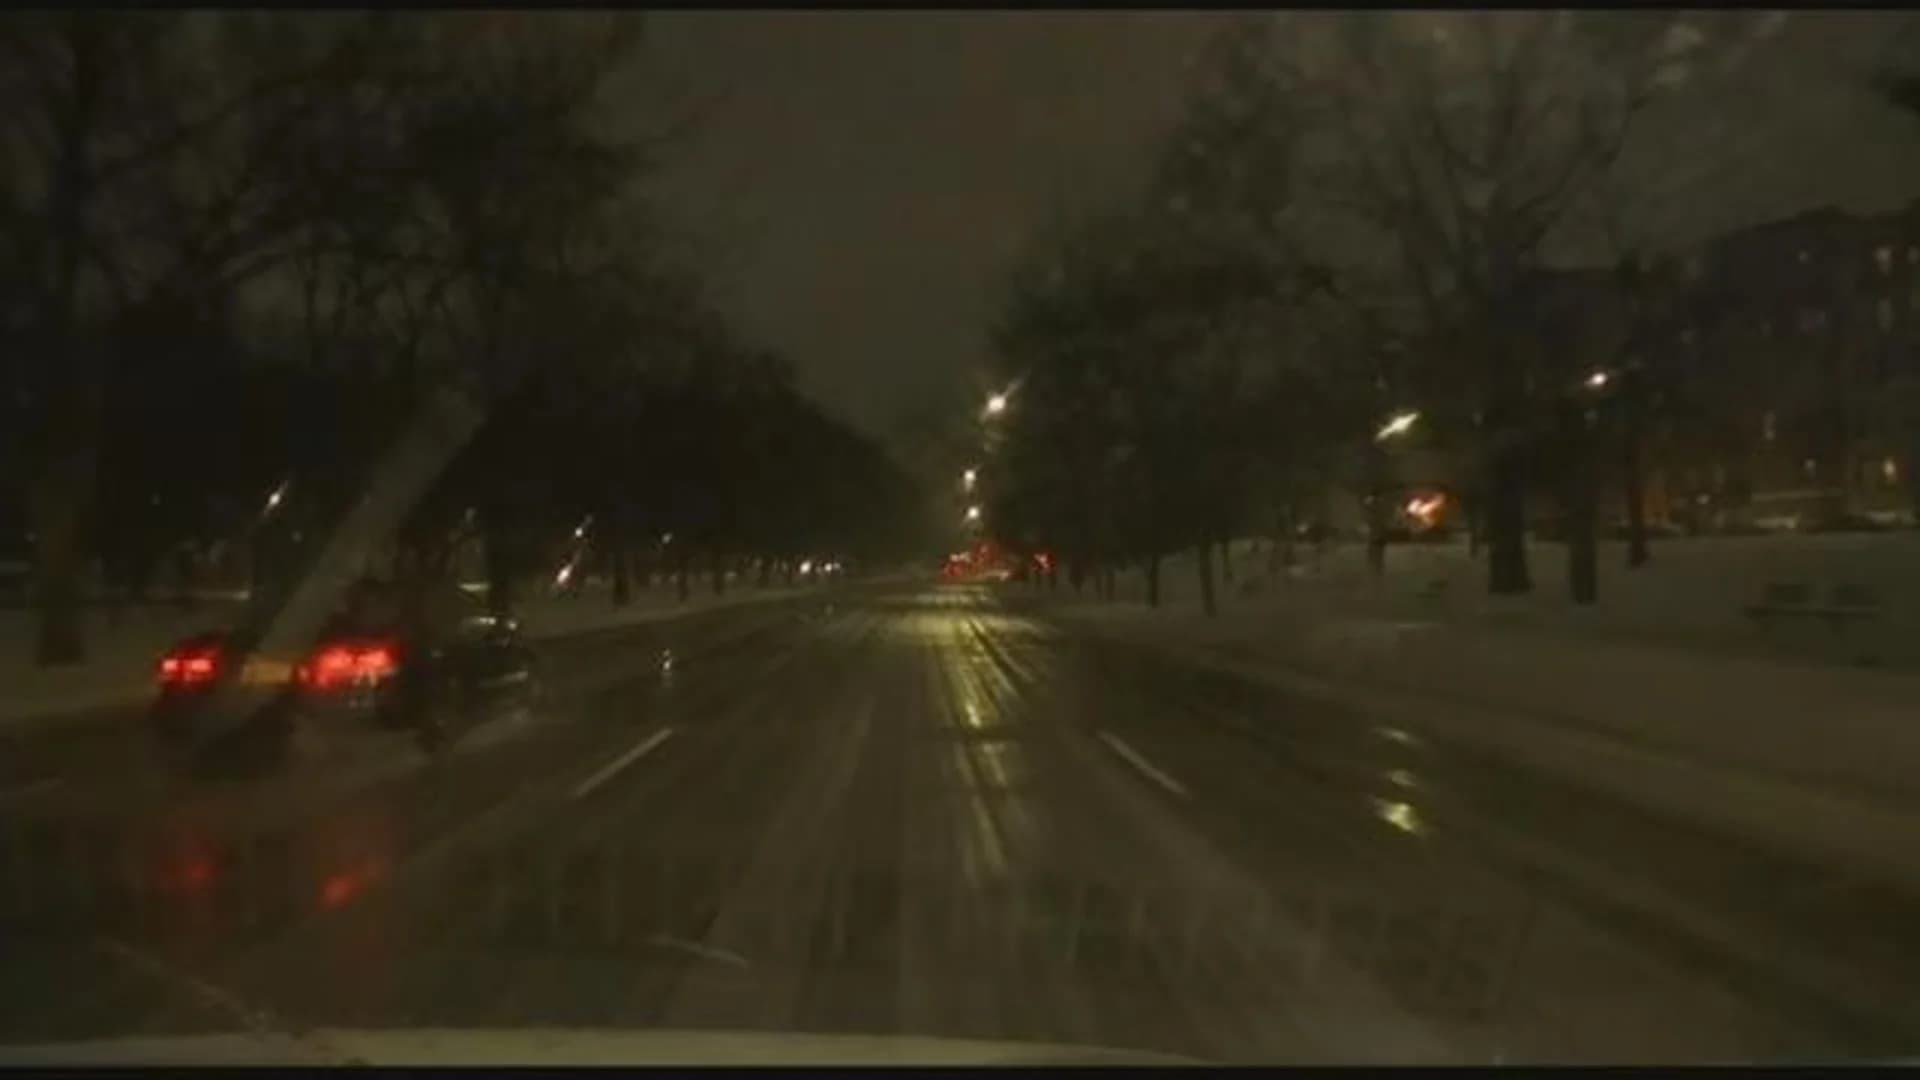 Messy roadways create slippery conditions throughout borough